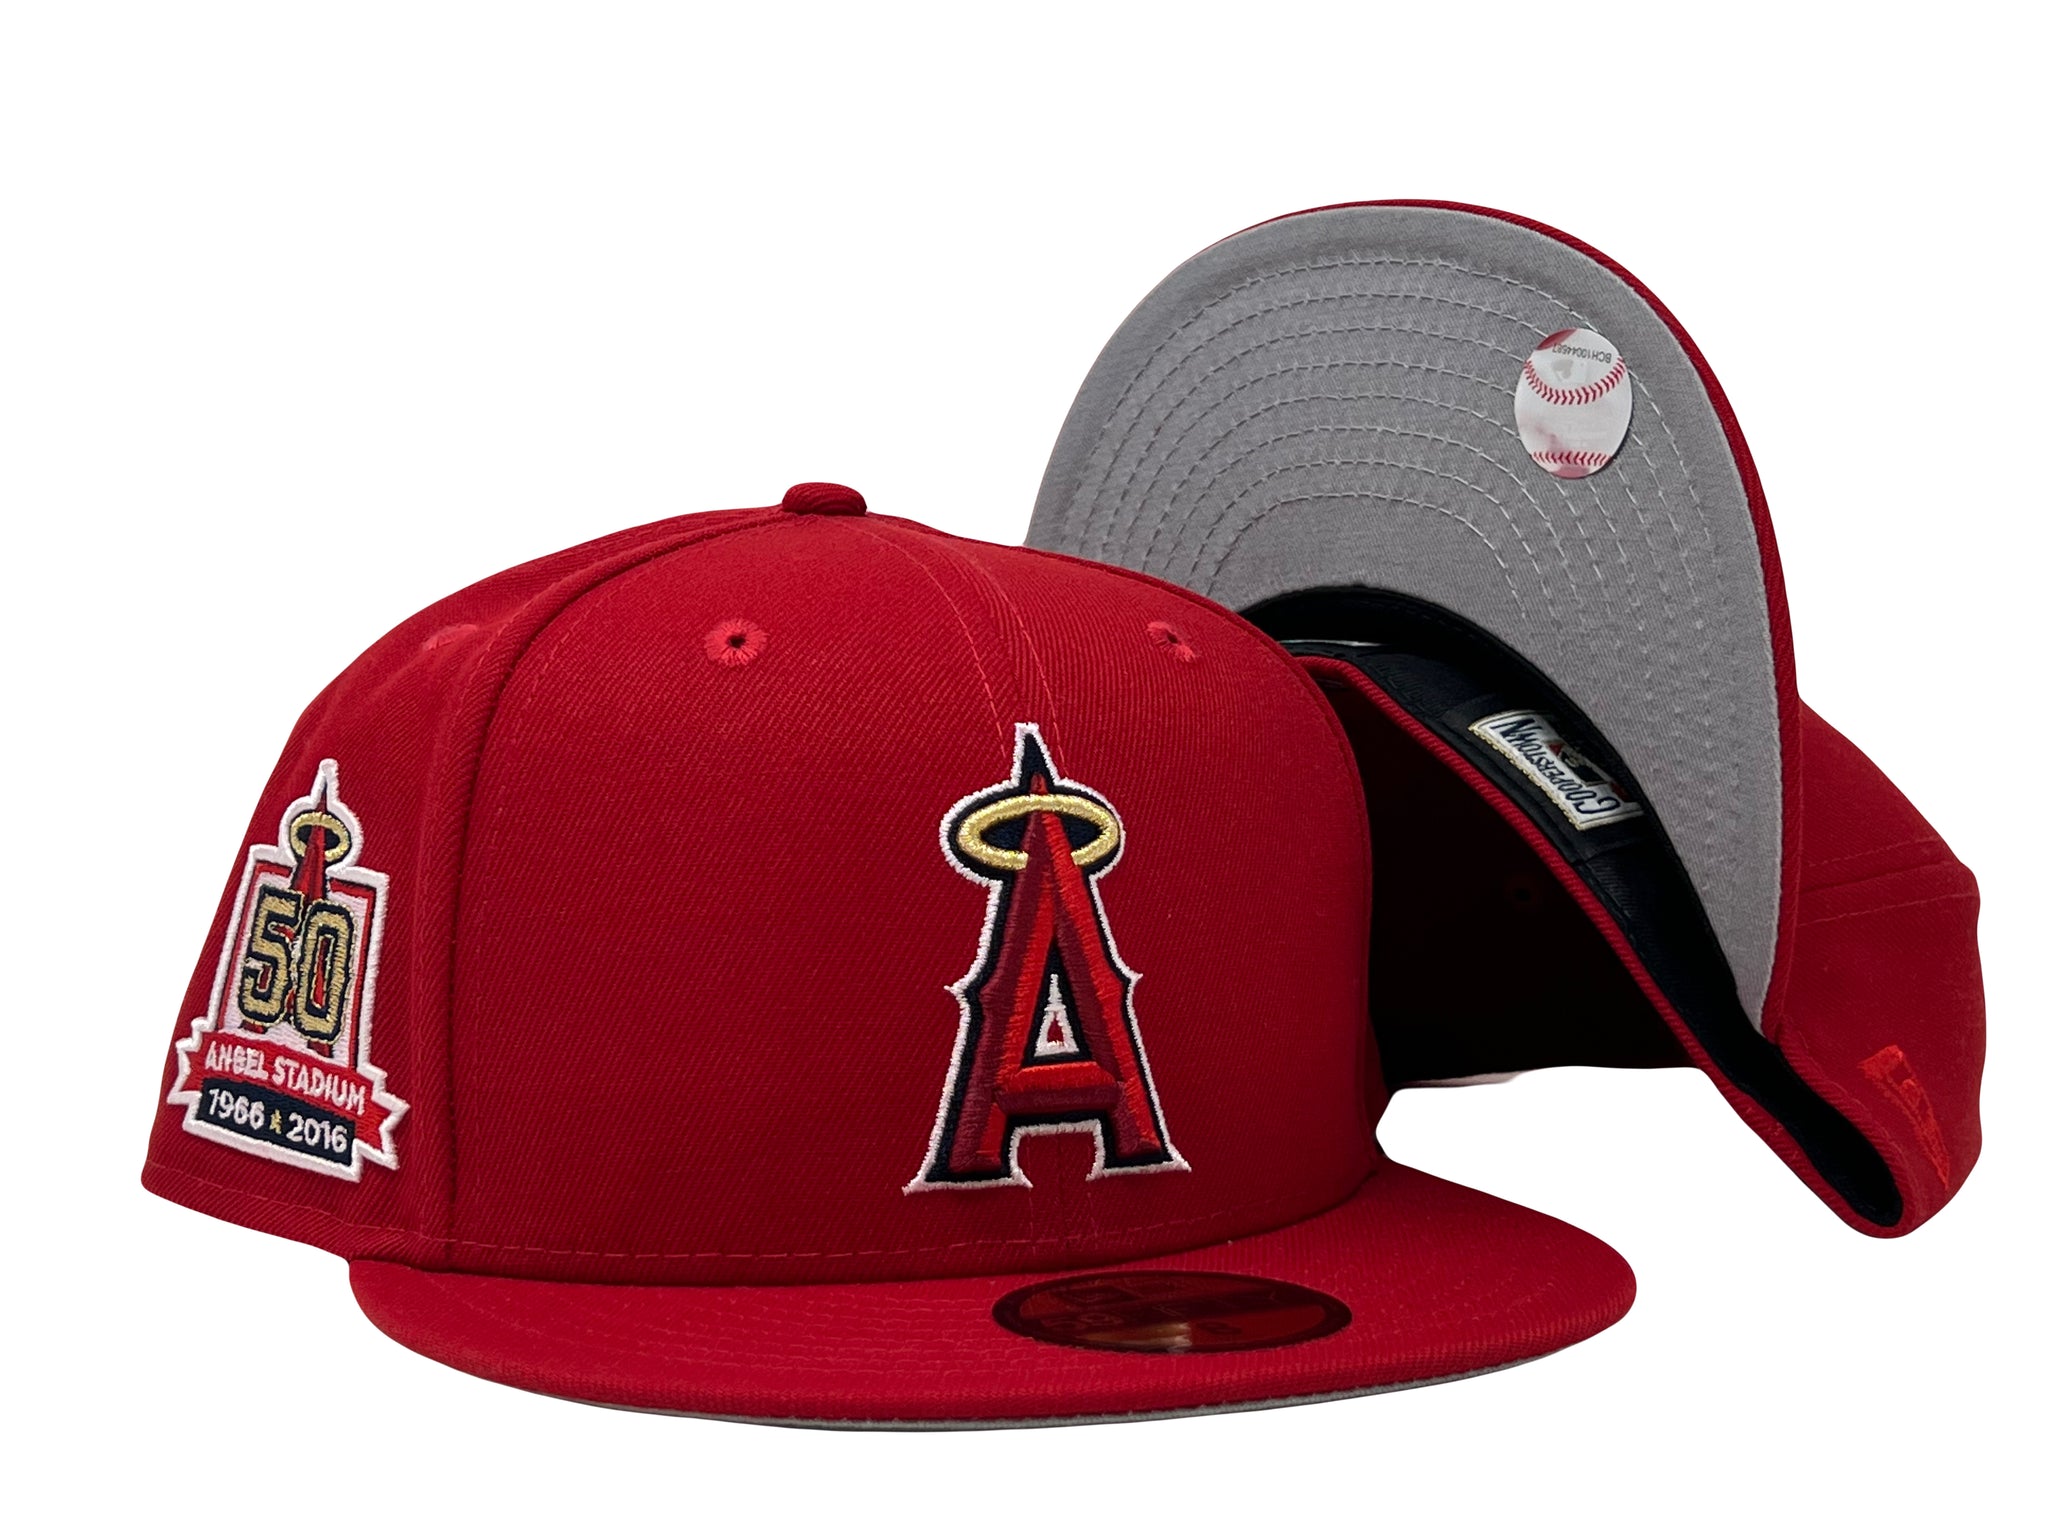 Los Angeles Angels 50th Anniversary Red Gray Brim New Era Fitted